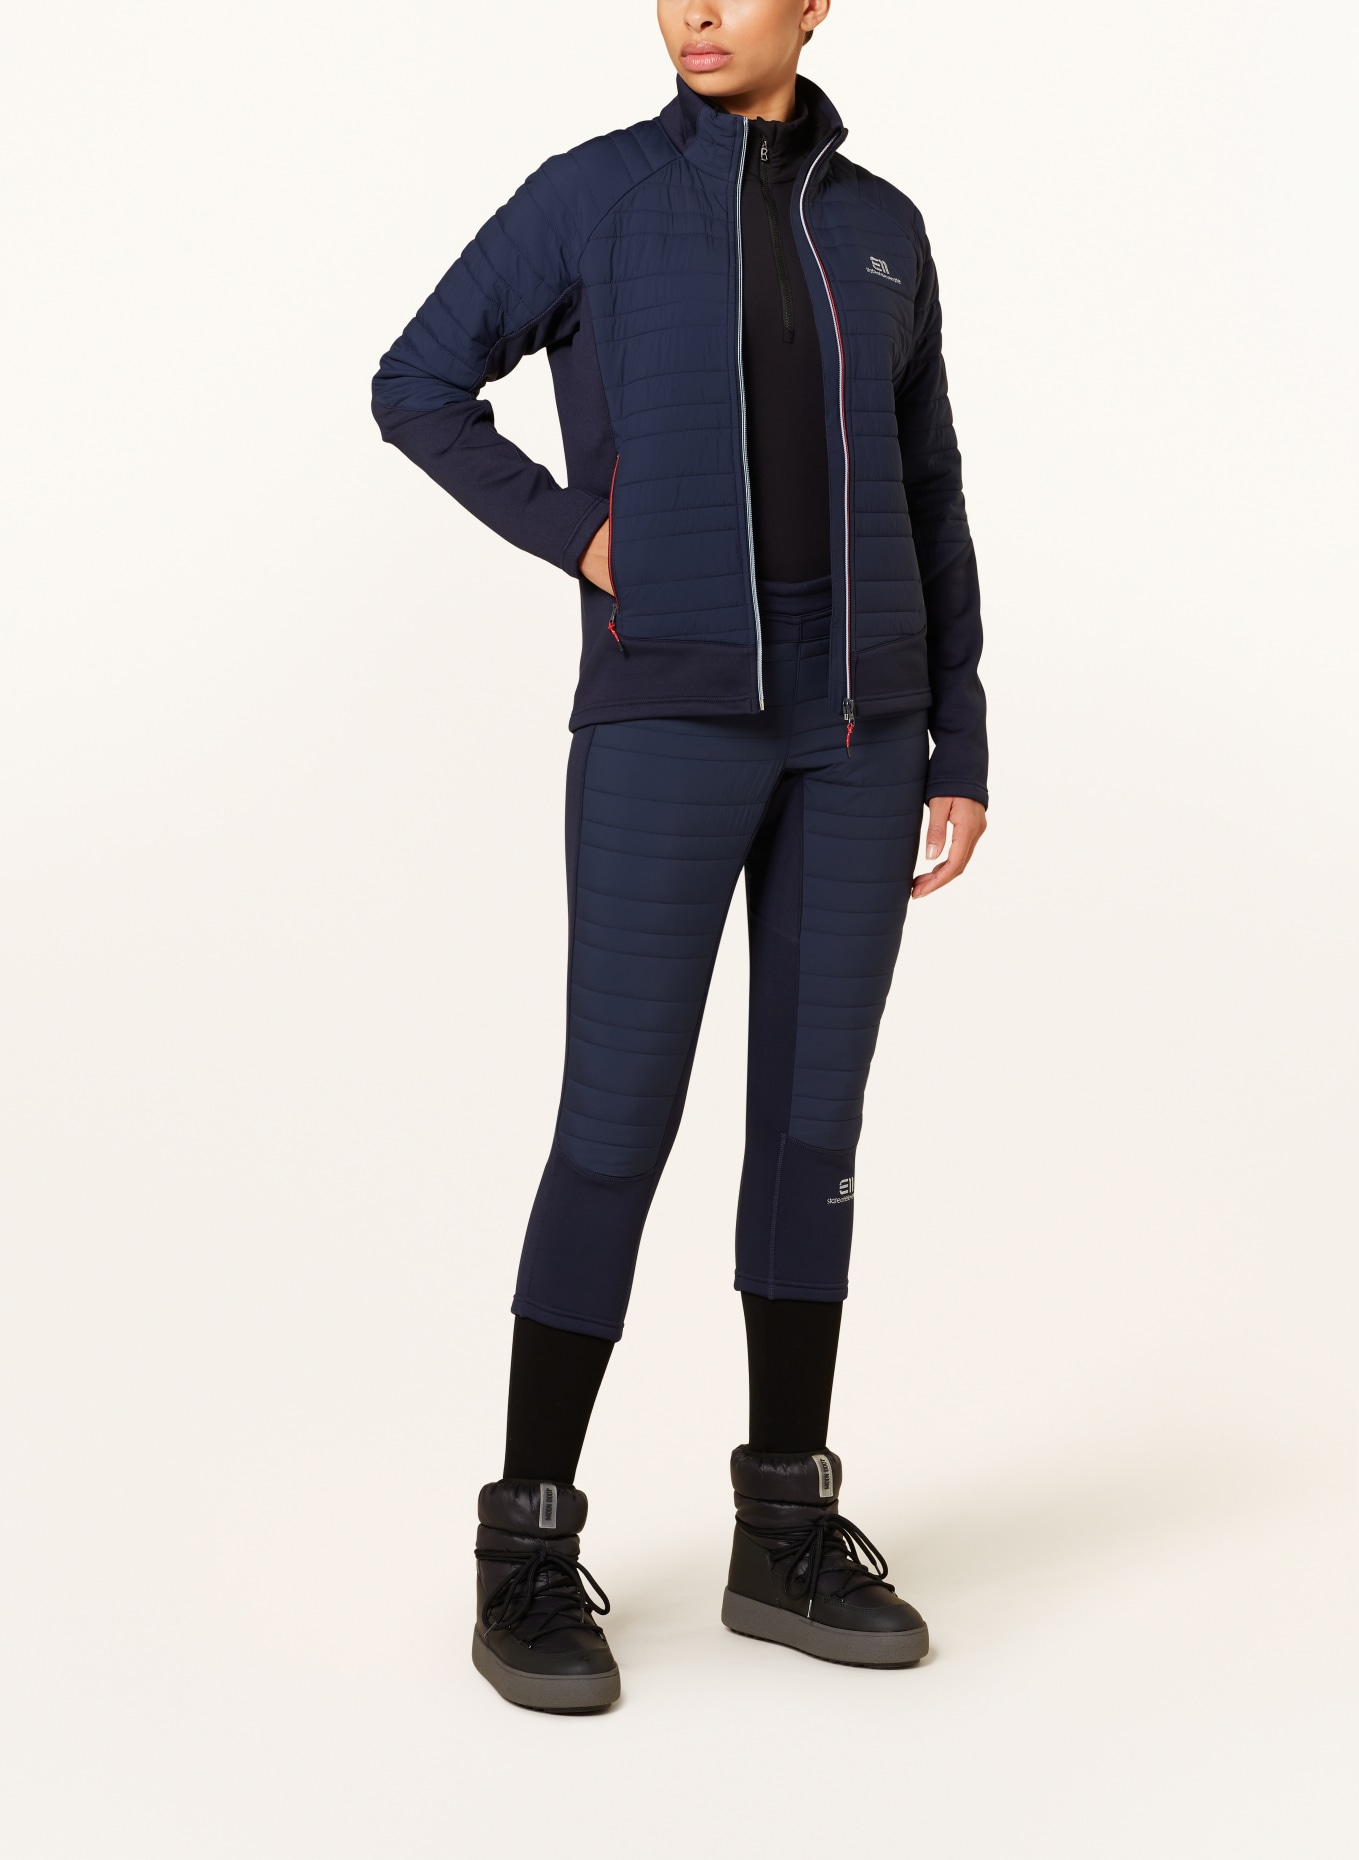 state of elevenate Mid-layer jacket FUSION, Color: DARK BLUE (Image 2)